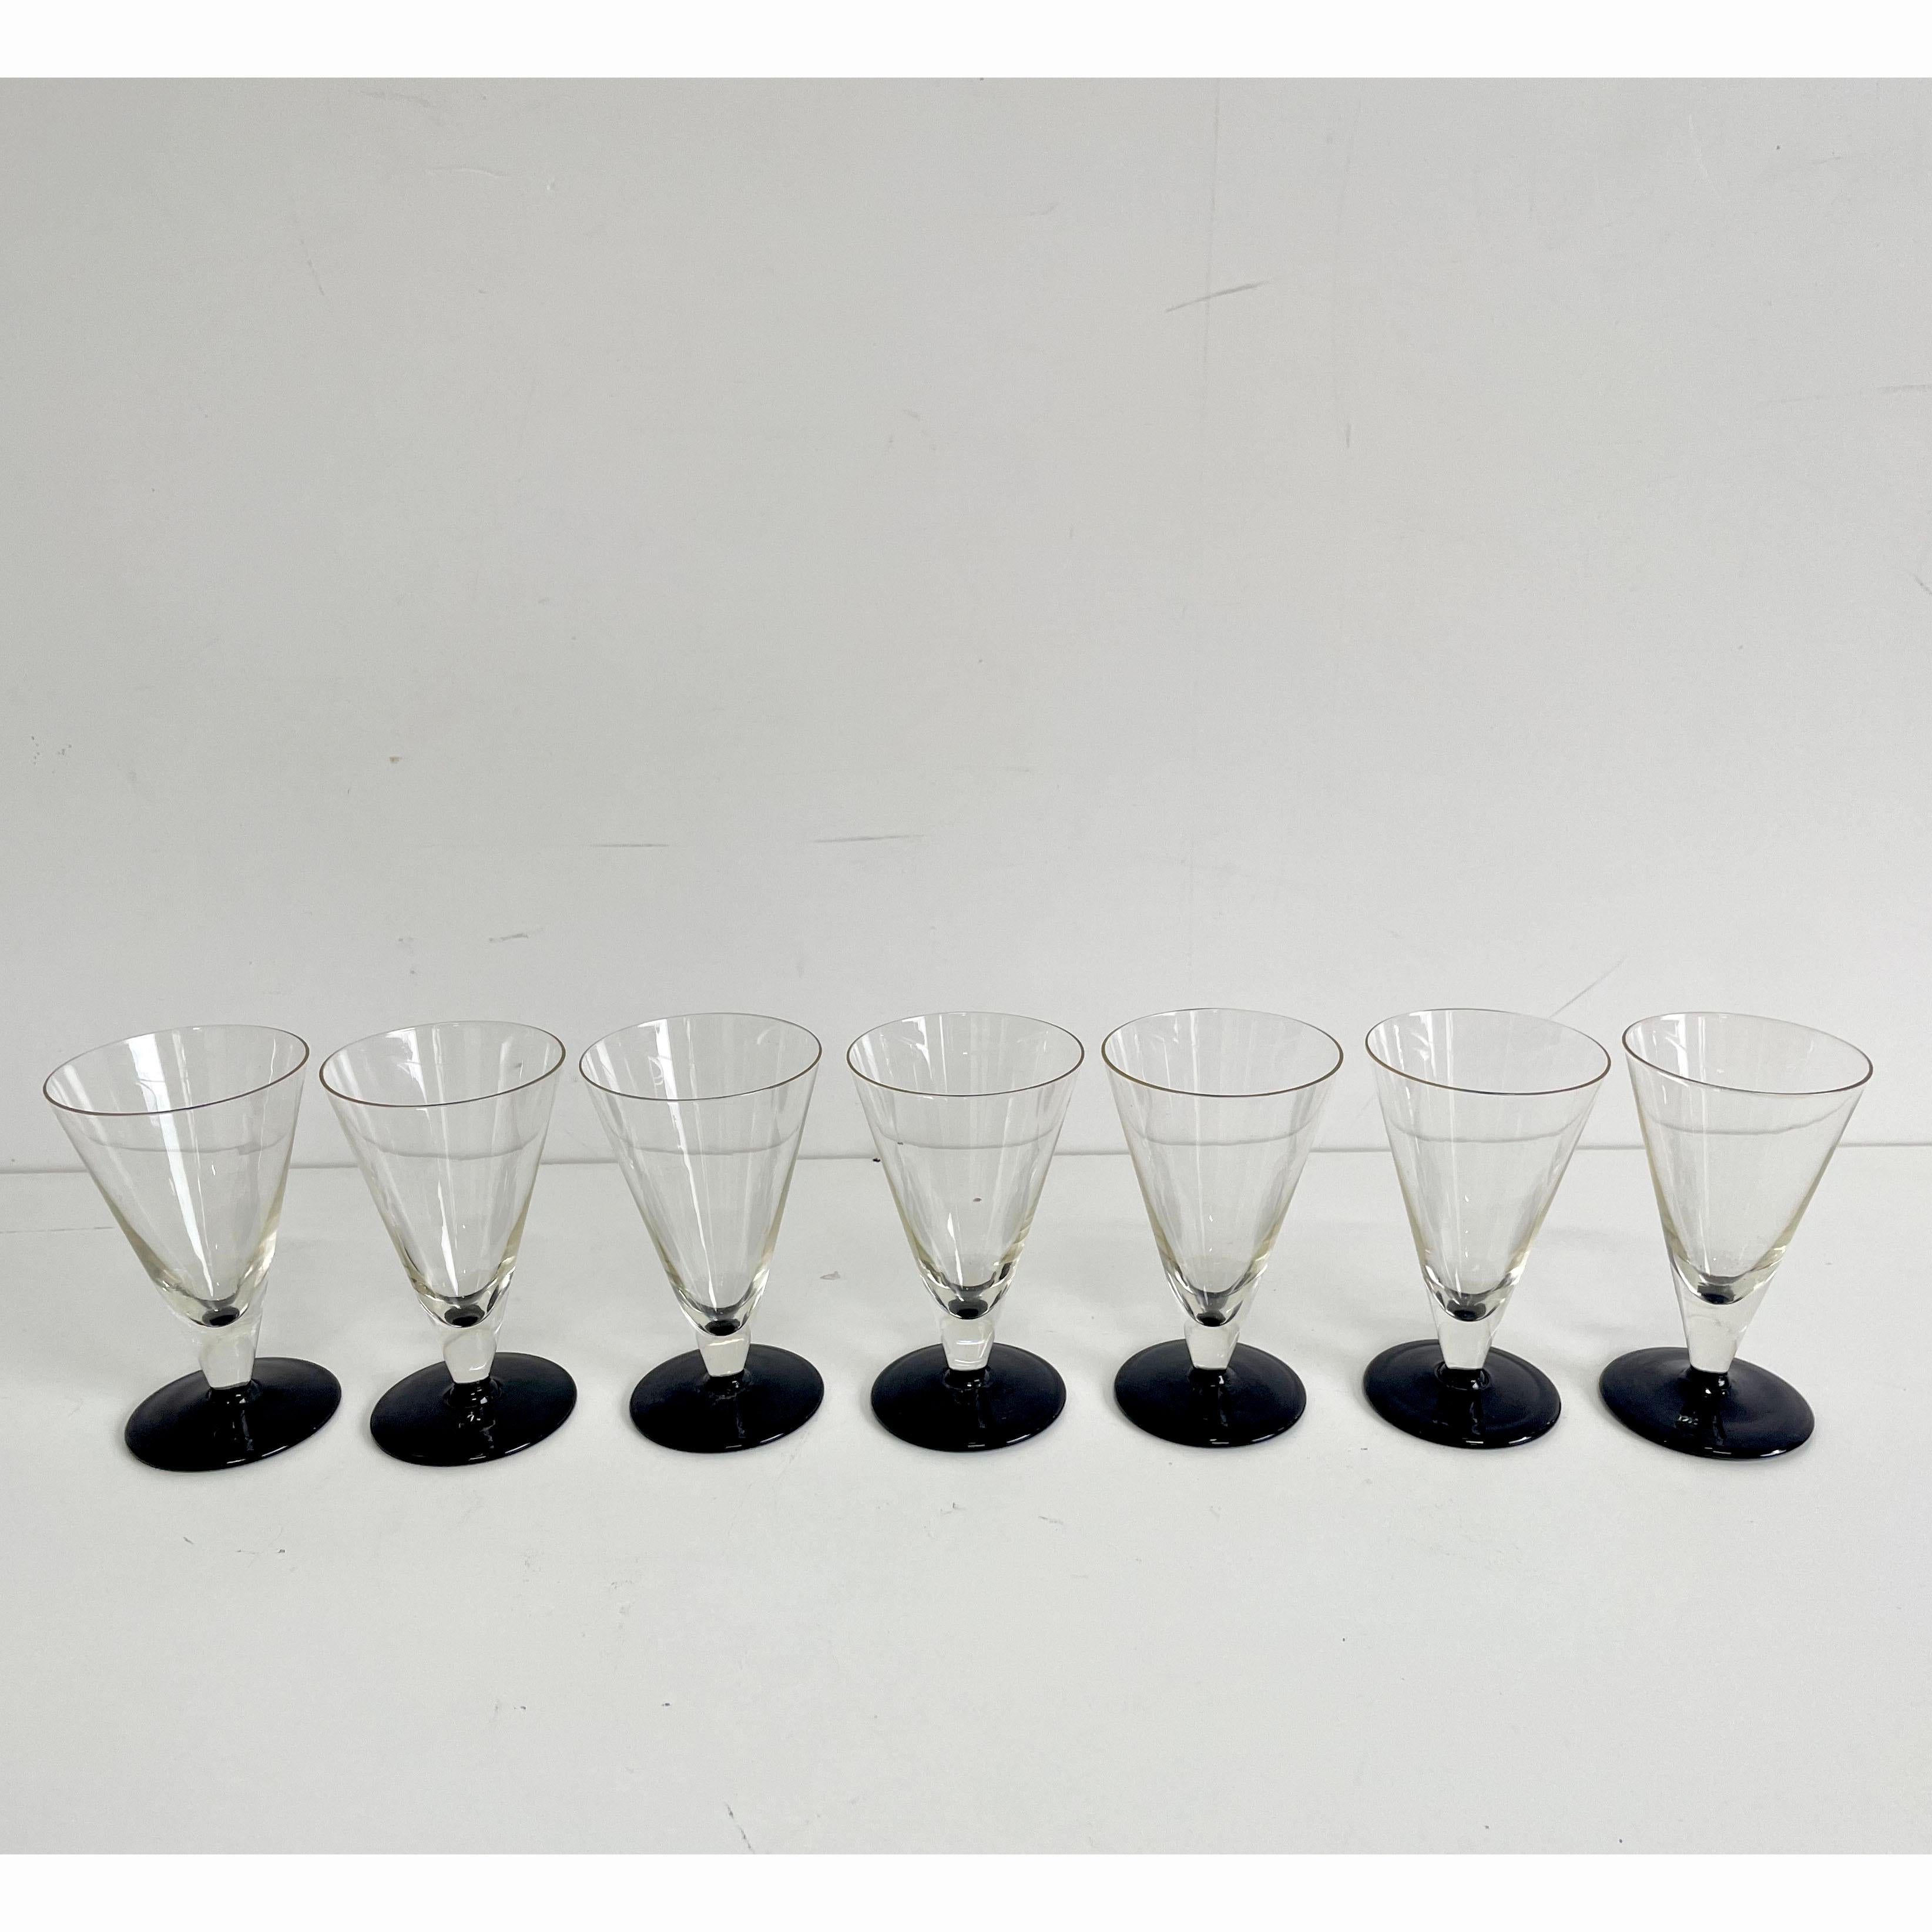 Very beautiful, simple and elegant 1930s Art Deco aperitif drinking glasses

Made of delicate hand blown glass

Set of 7 (7th glass is a spare glass)

The glasses are in great condition, with minimal traces of age and use
There are no chips, cracks